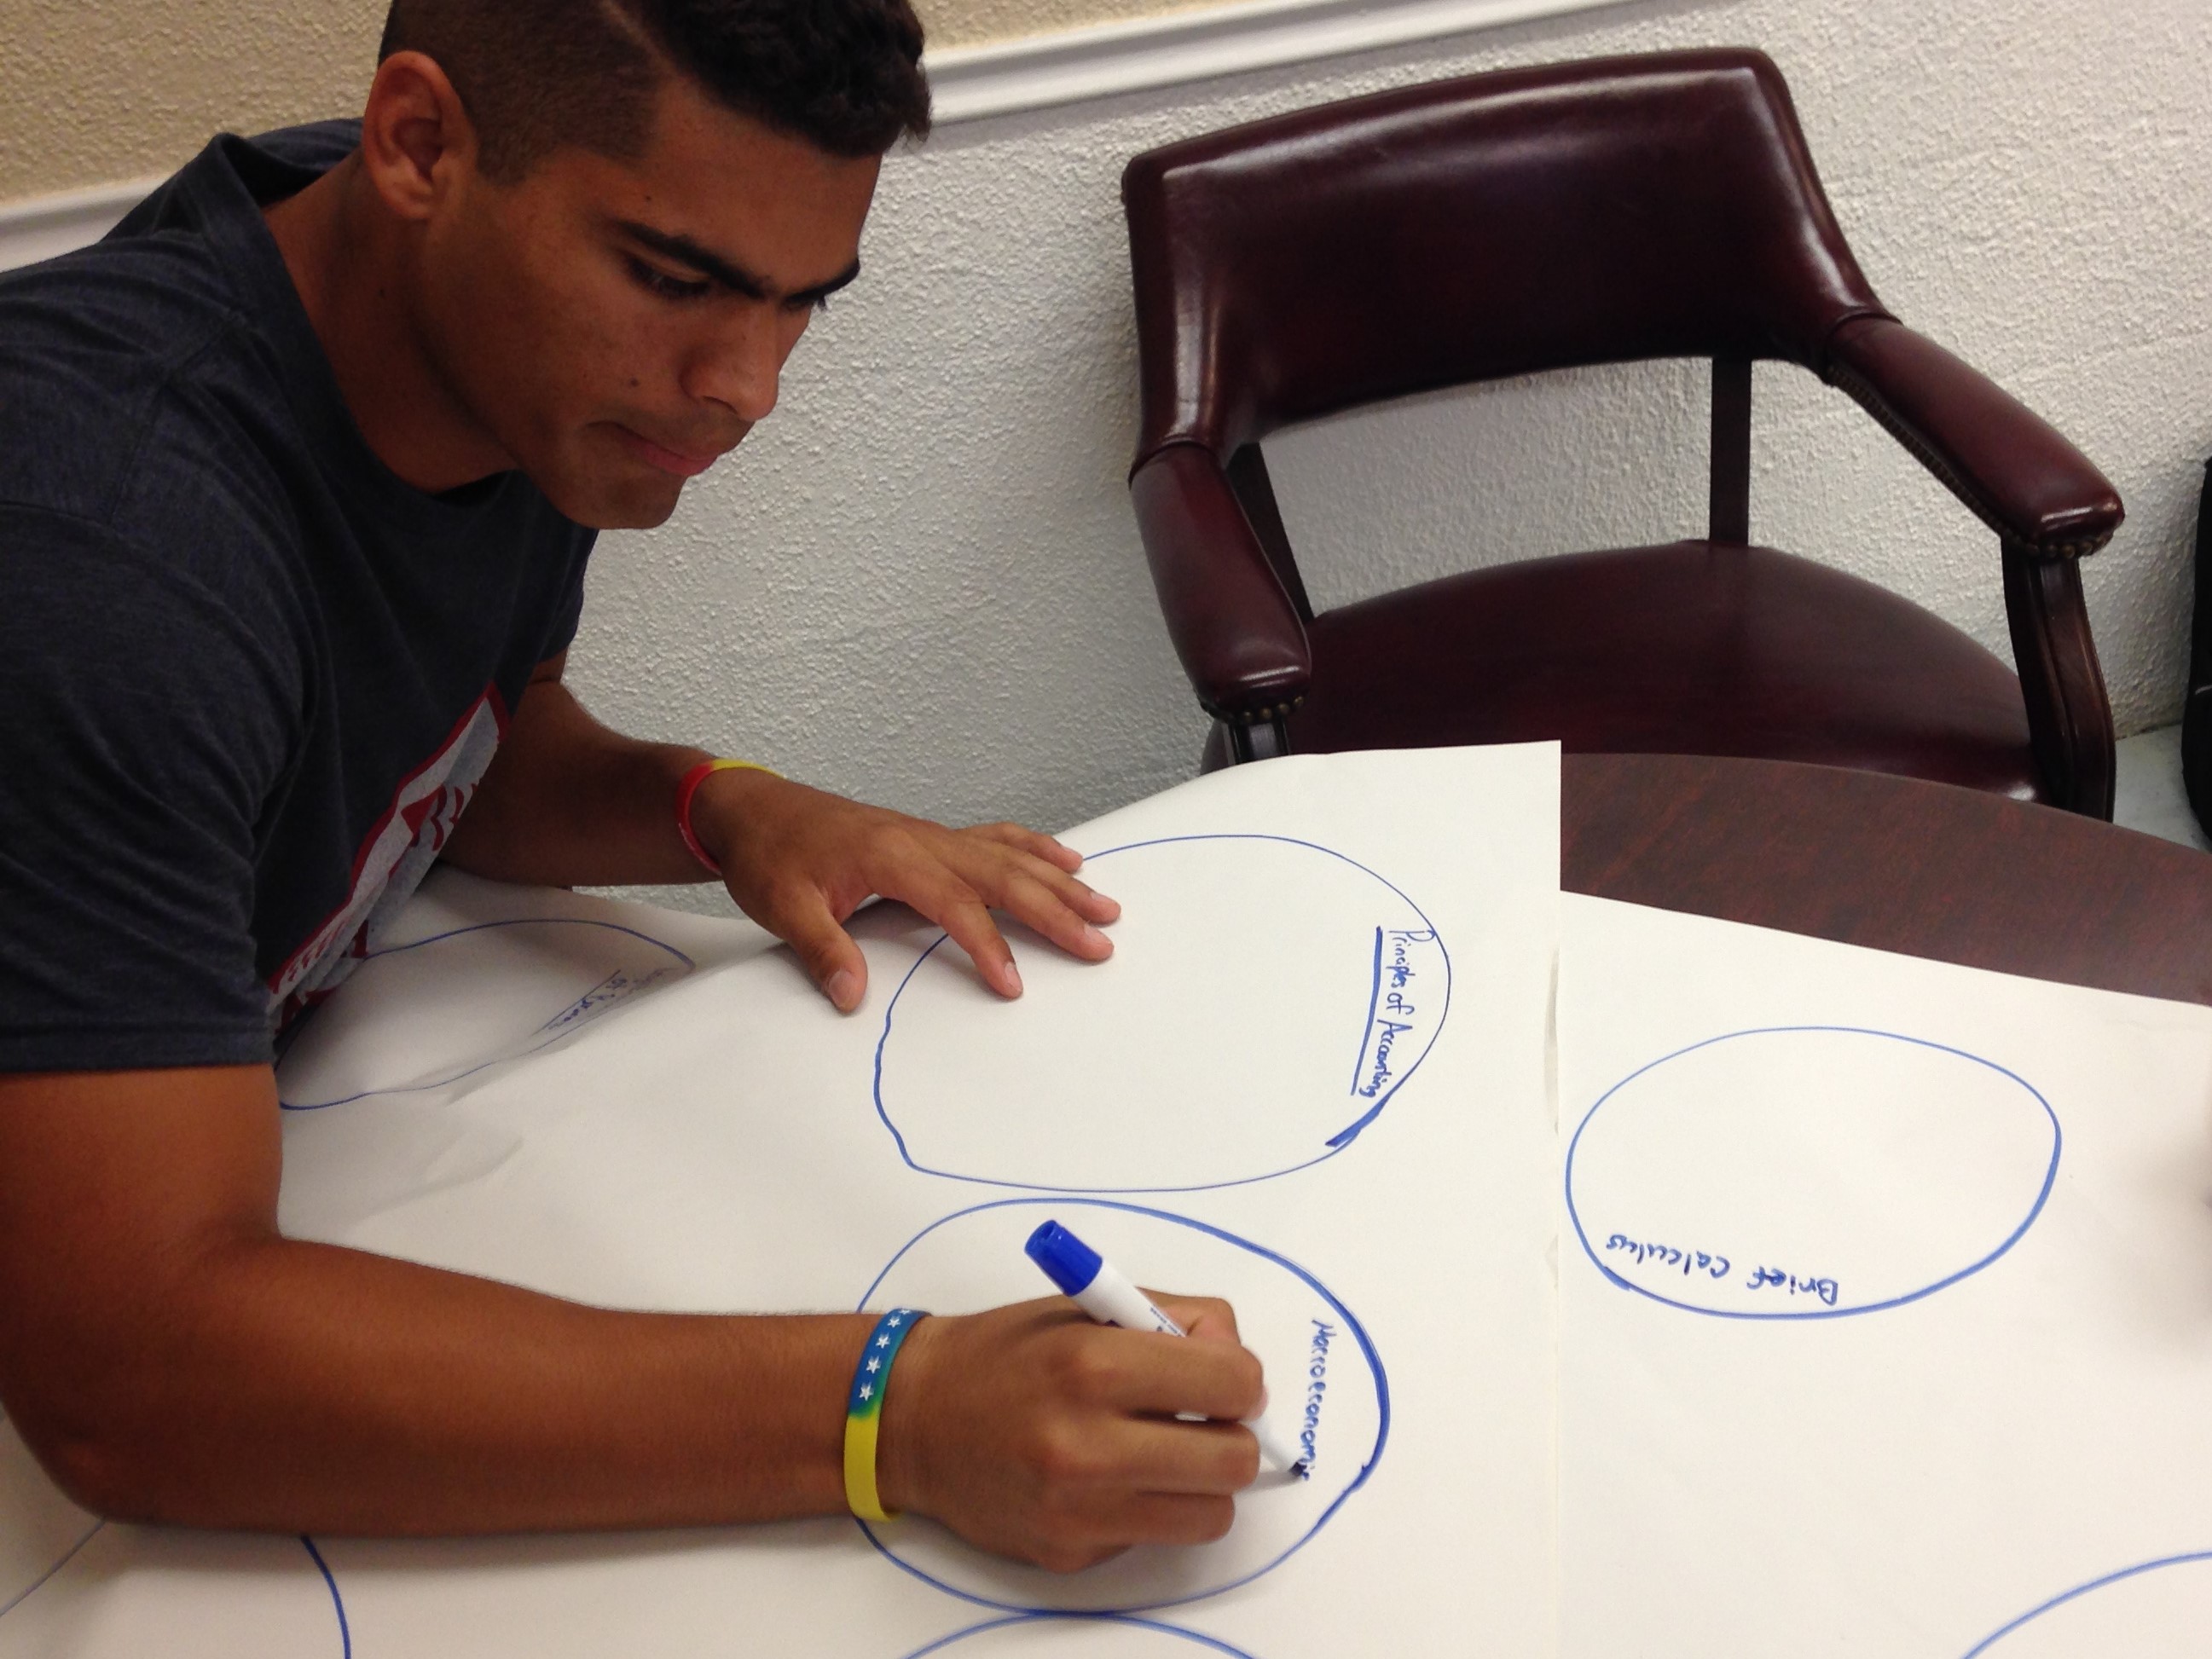 UNG baseball player, Andres Perez, engages with a visual literacy mapping exercise to chart points of connection and departure among the many literacies in which he engages.